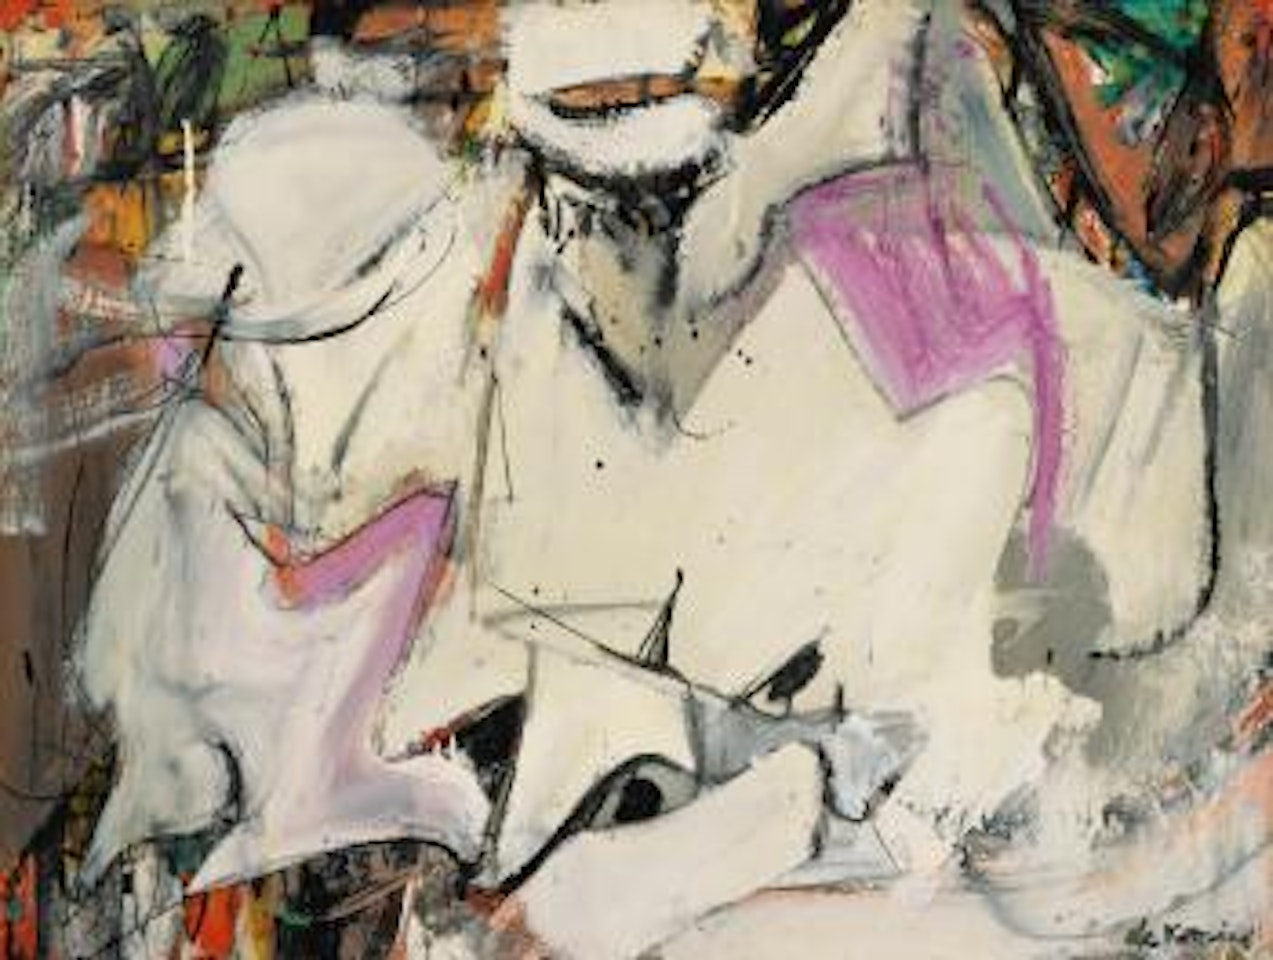 Abstraction by Willem de Kooning